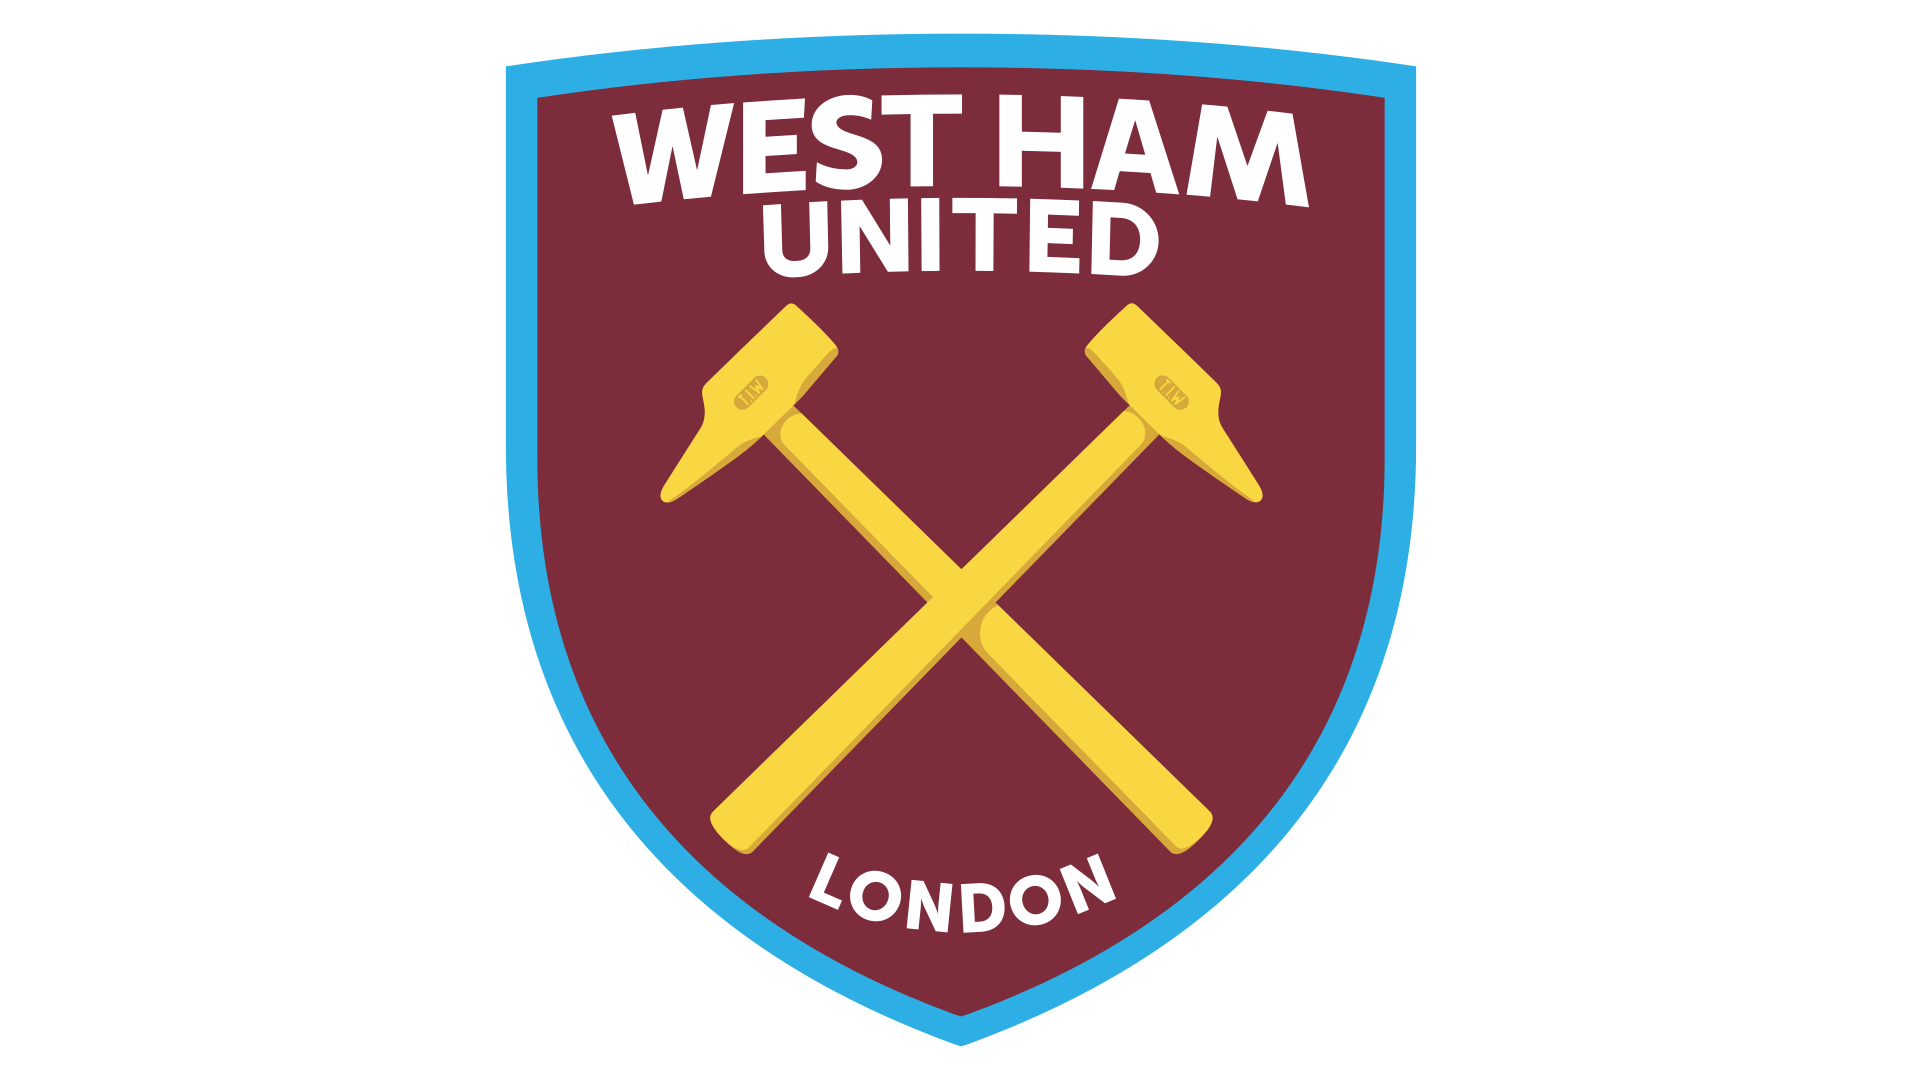 West Ham Logo - West Ham United logo, West Ham United Symbol, Meaning, History